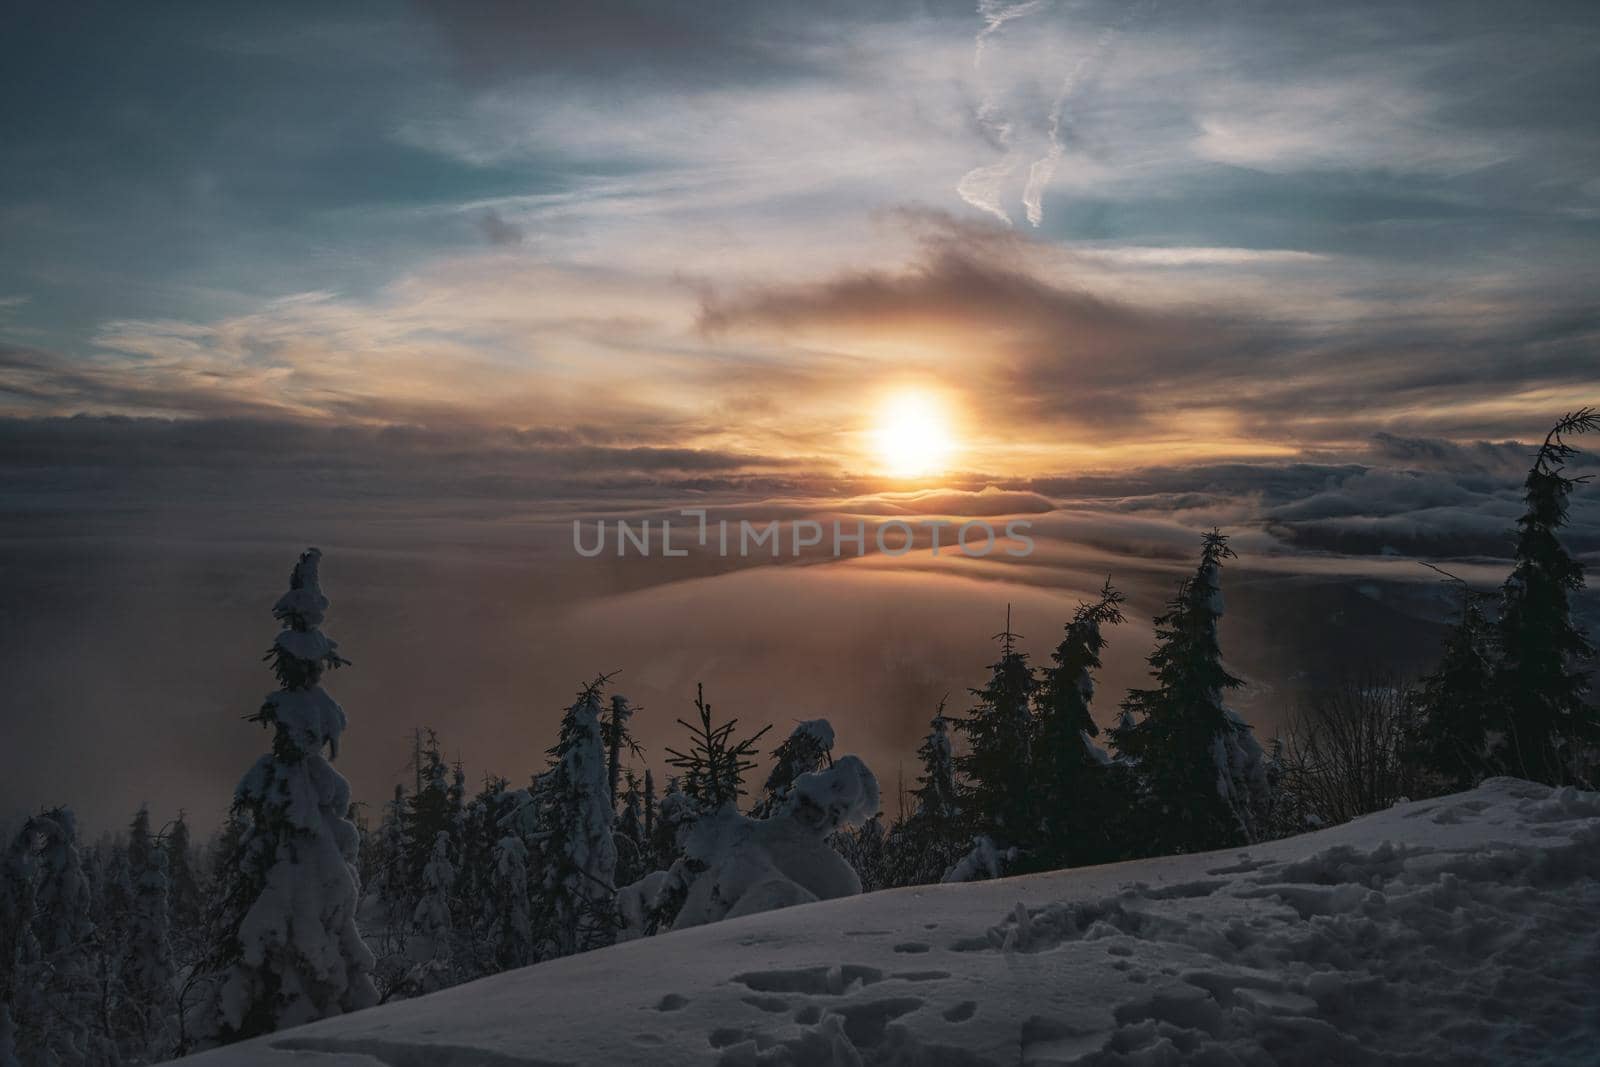 Dramatic Sunset with Trees and Low Clouds View Landscape from Mountain Peak with deep snow by Skrobanek